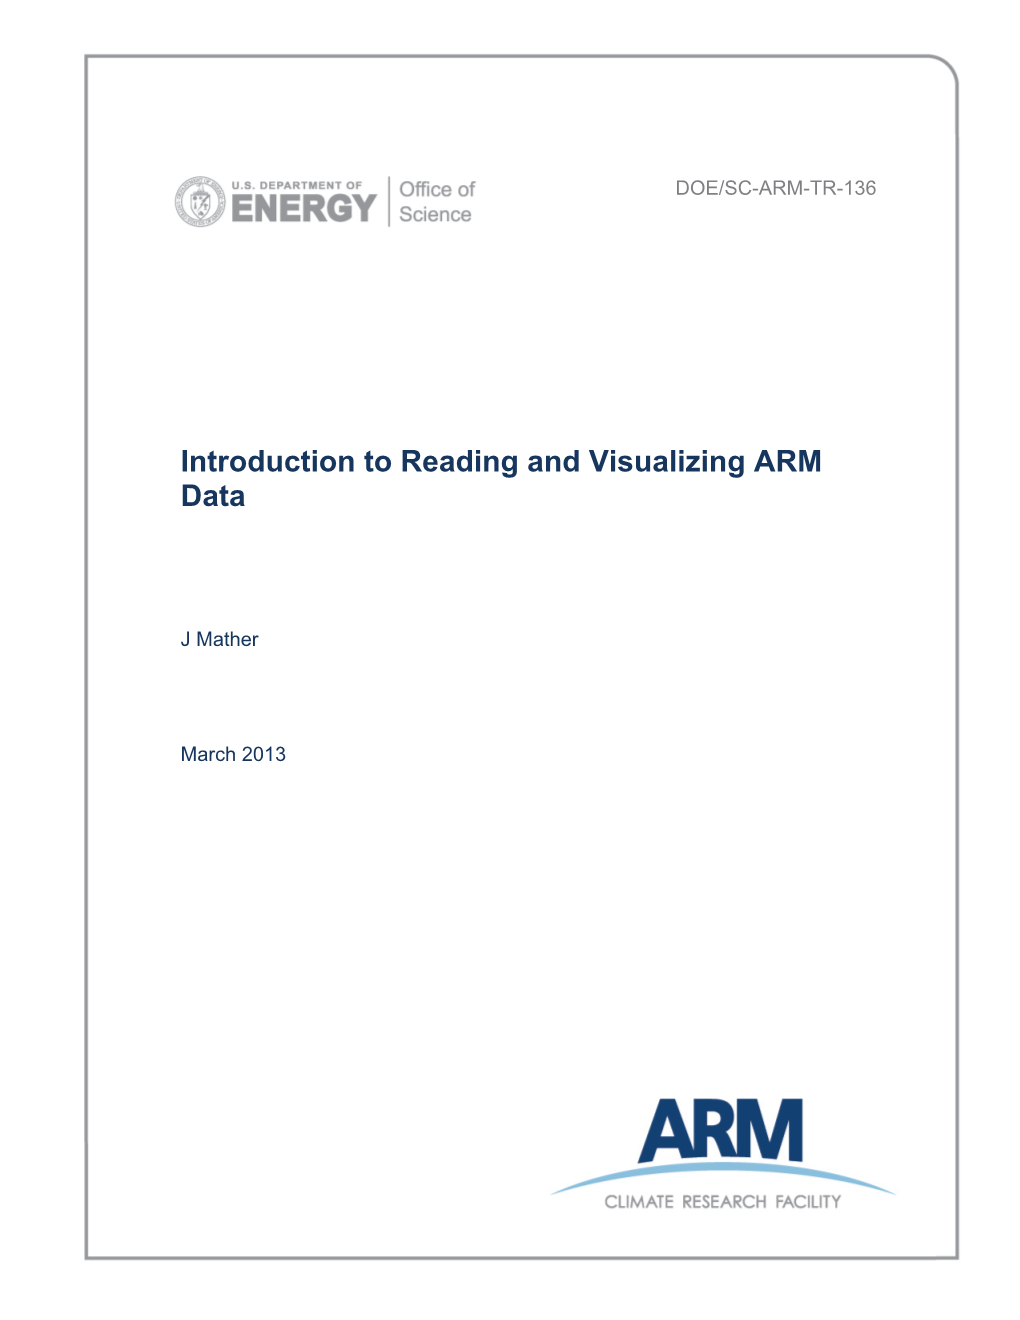 Introduction to Reading and Visualizing ARM Data